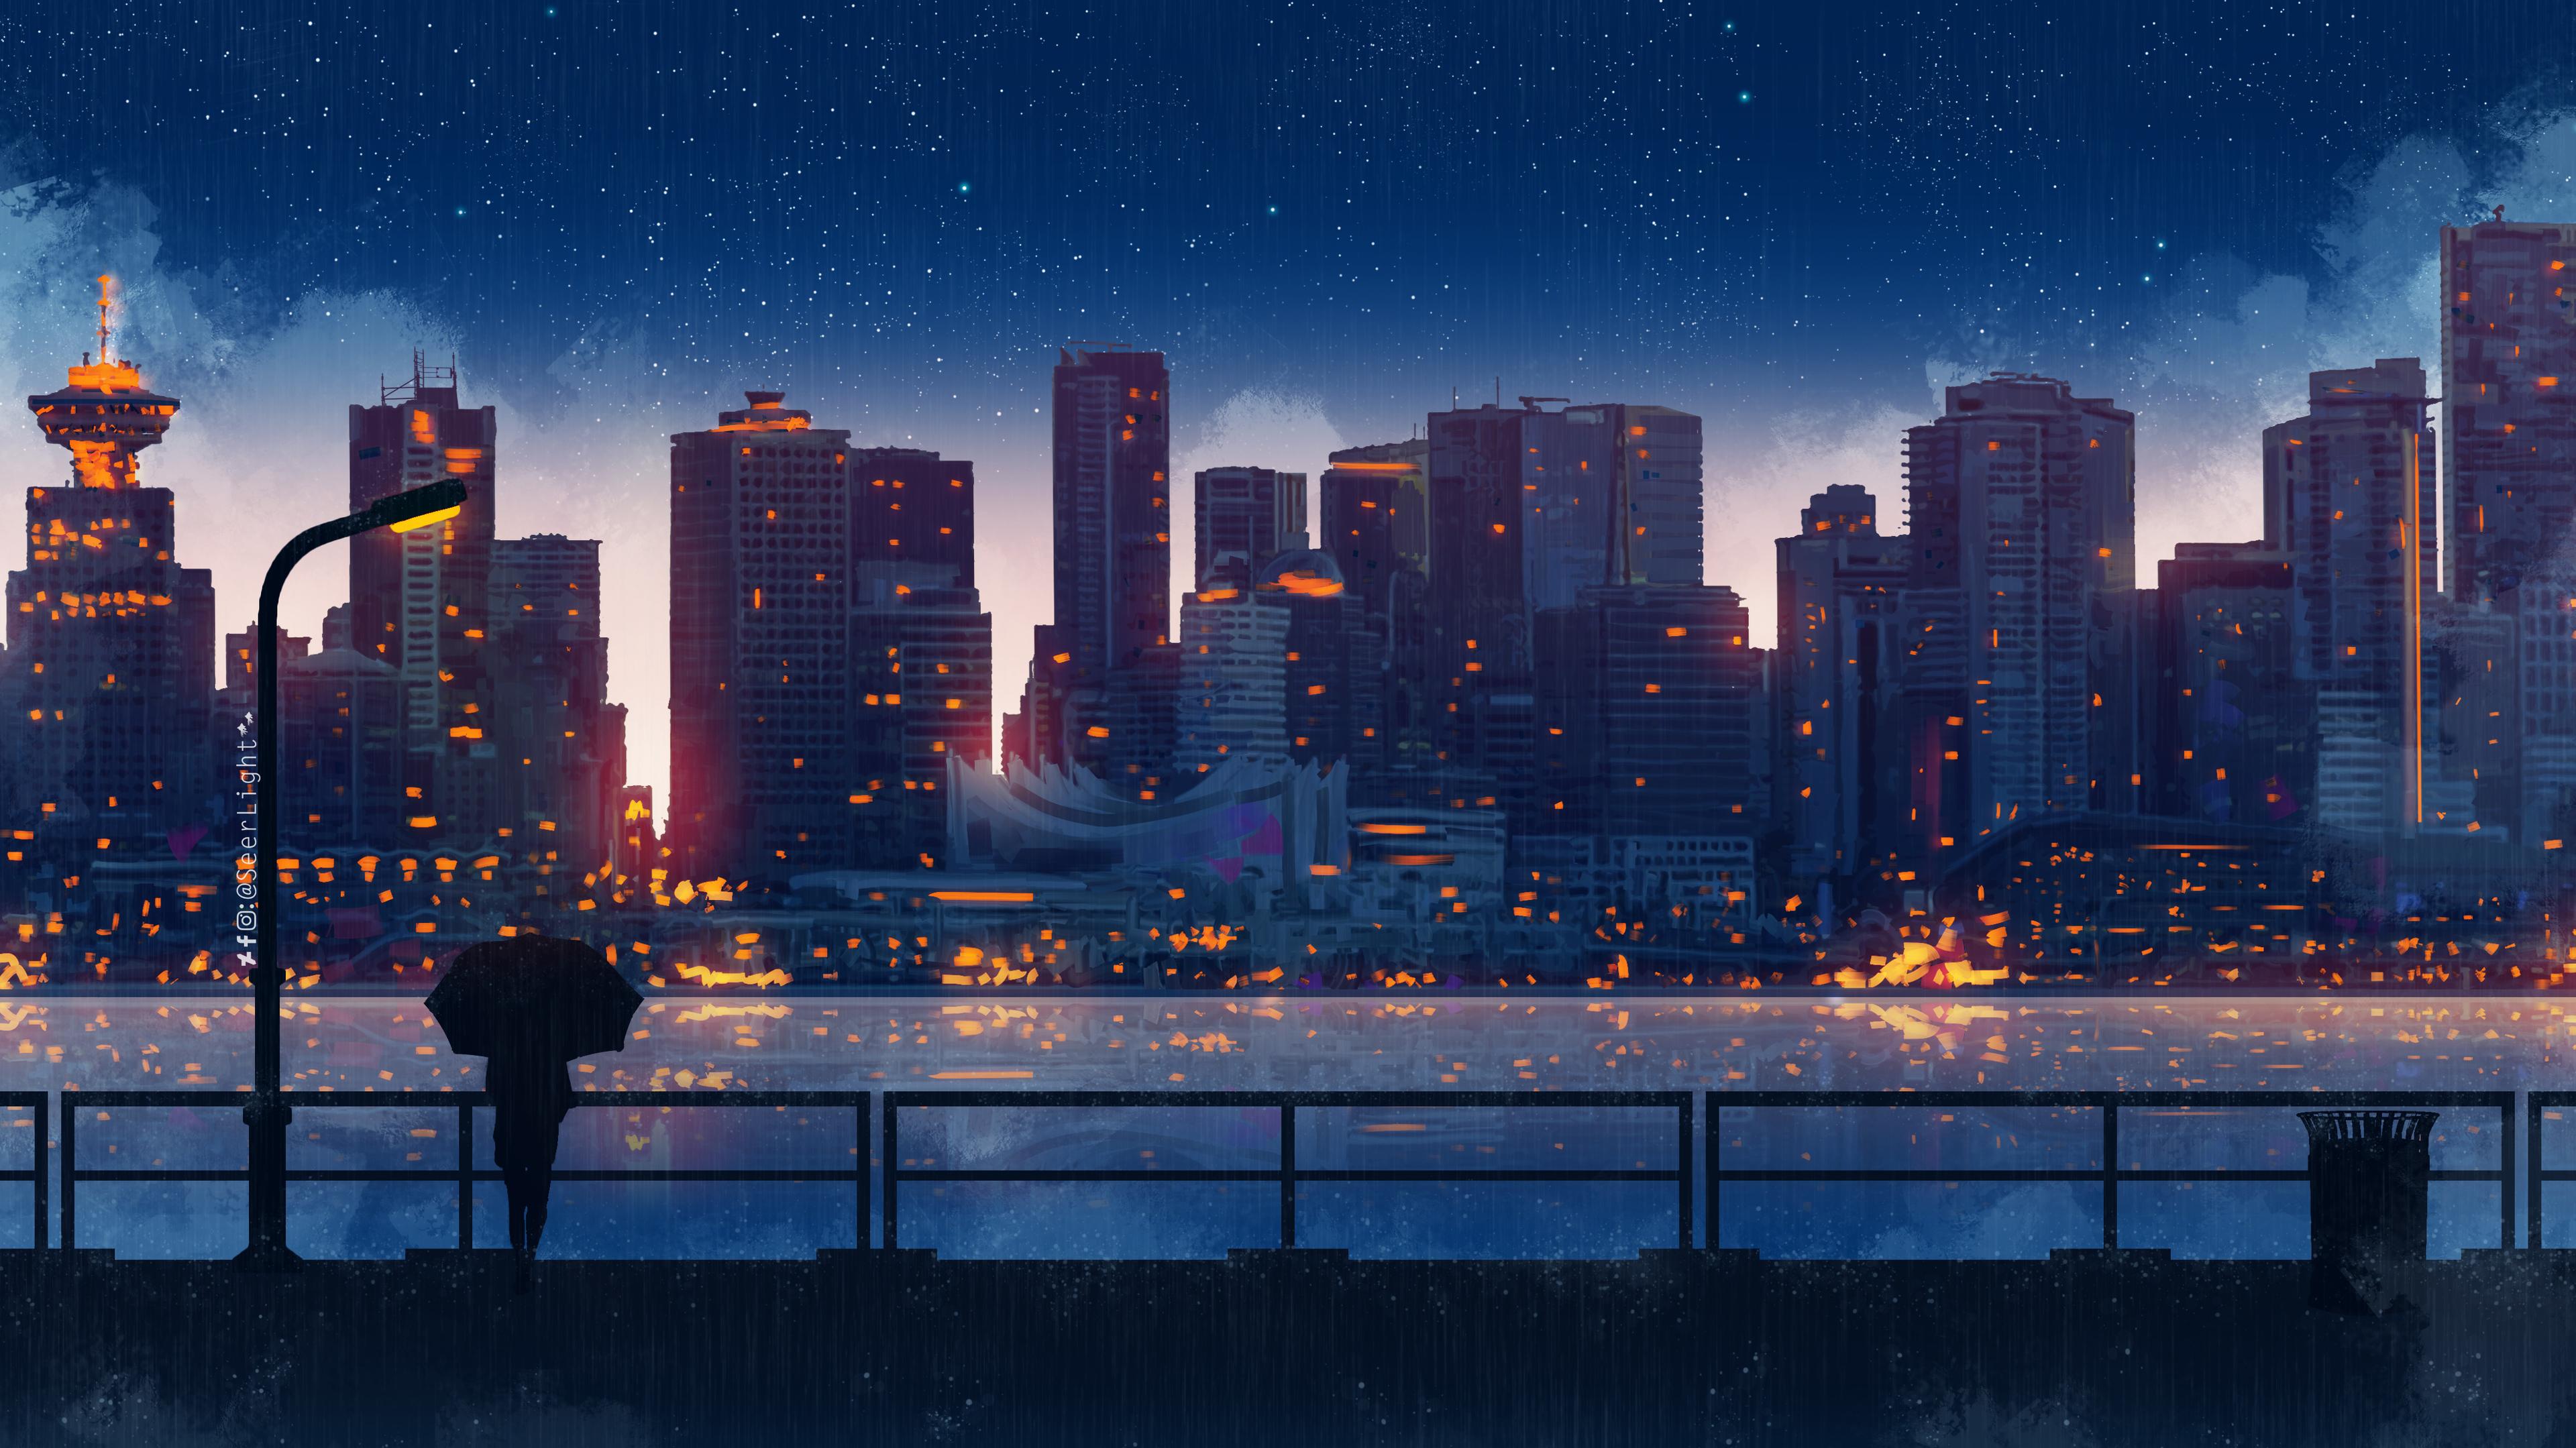 Anime Background AFTER RAIN by YeeHengYeo on DeviantArt